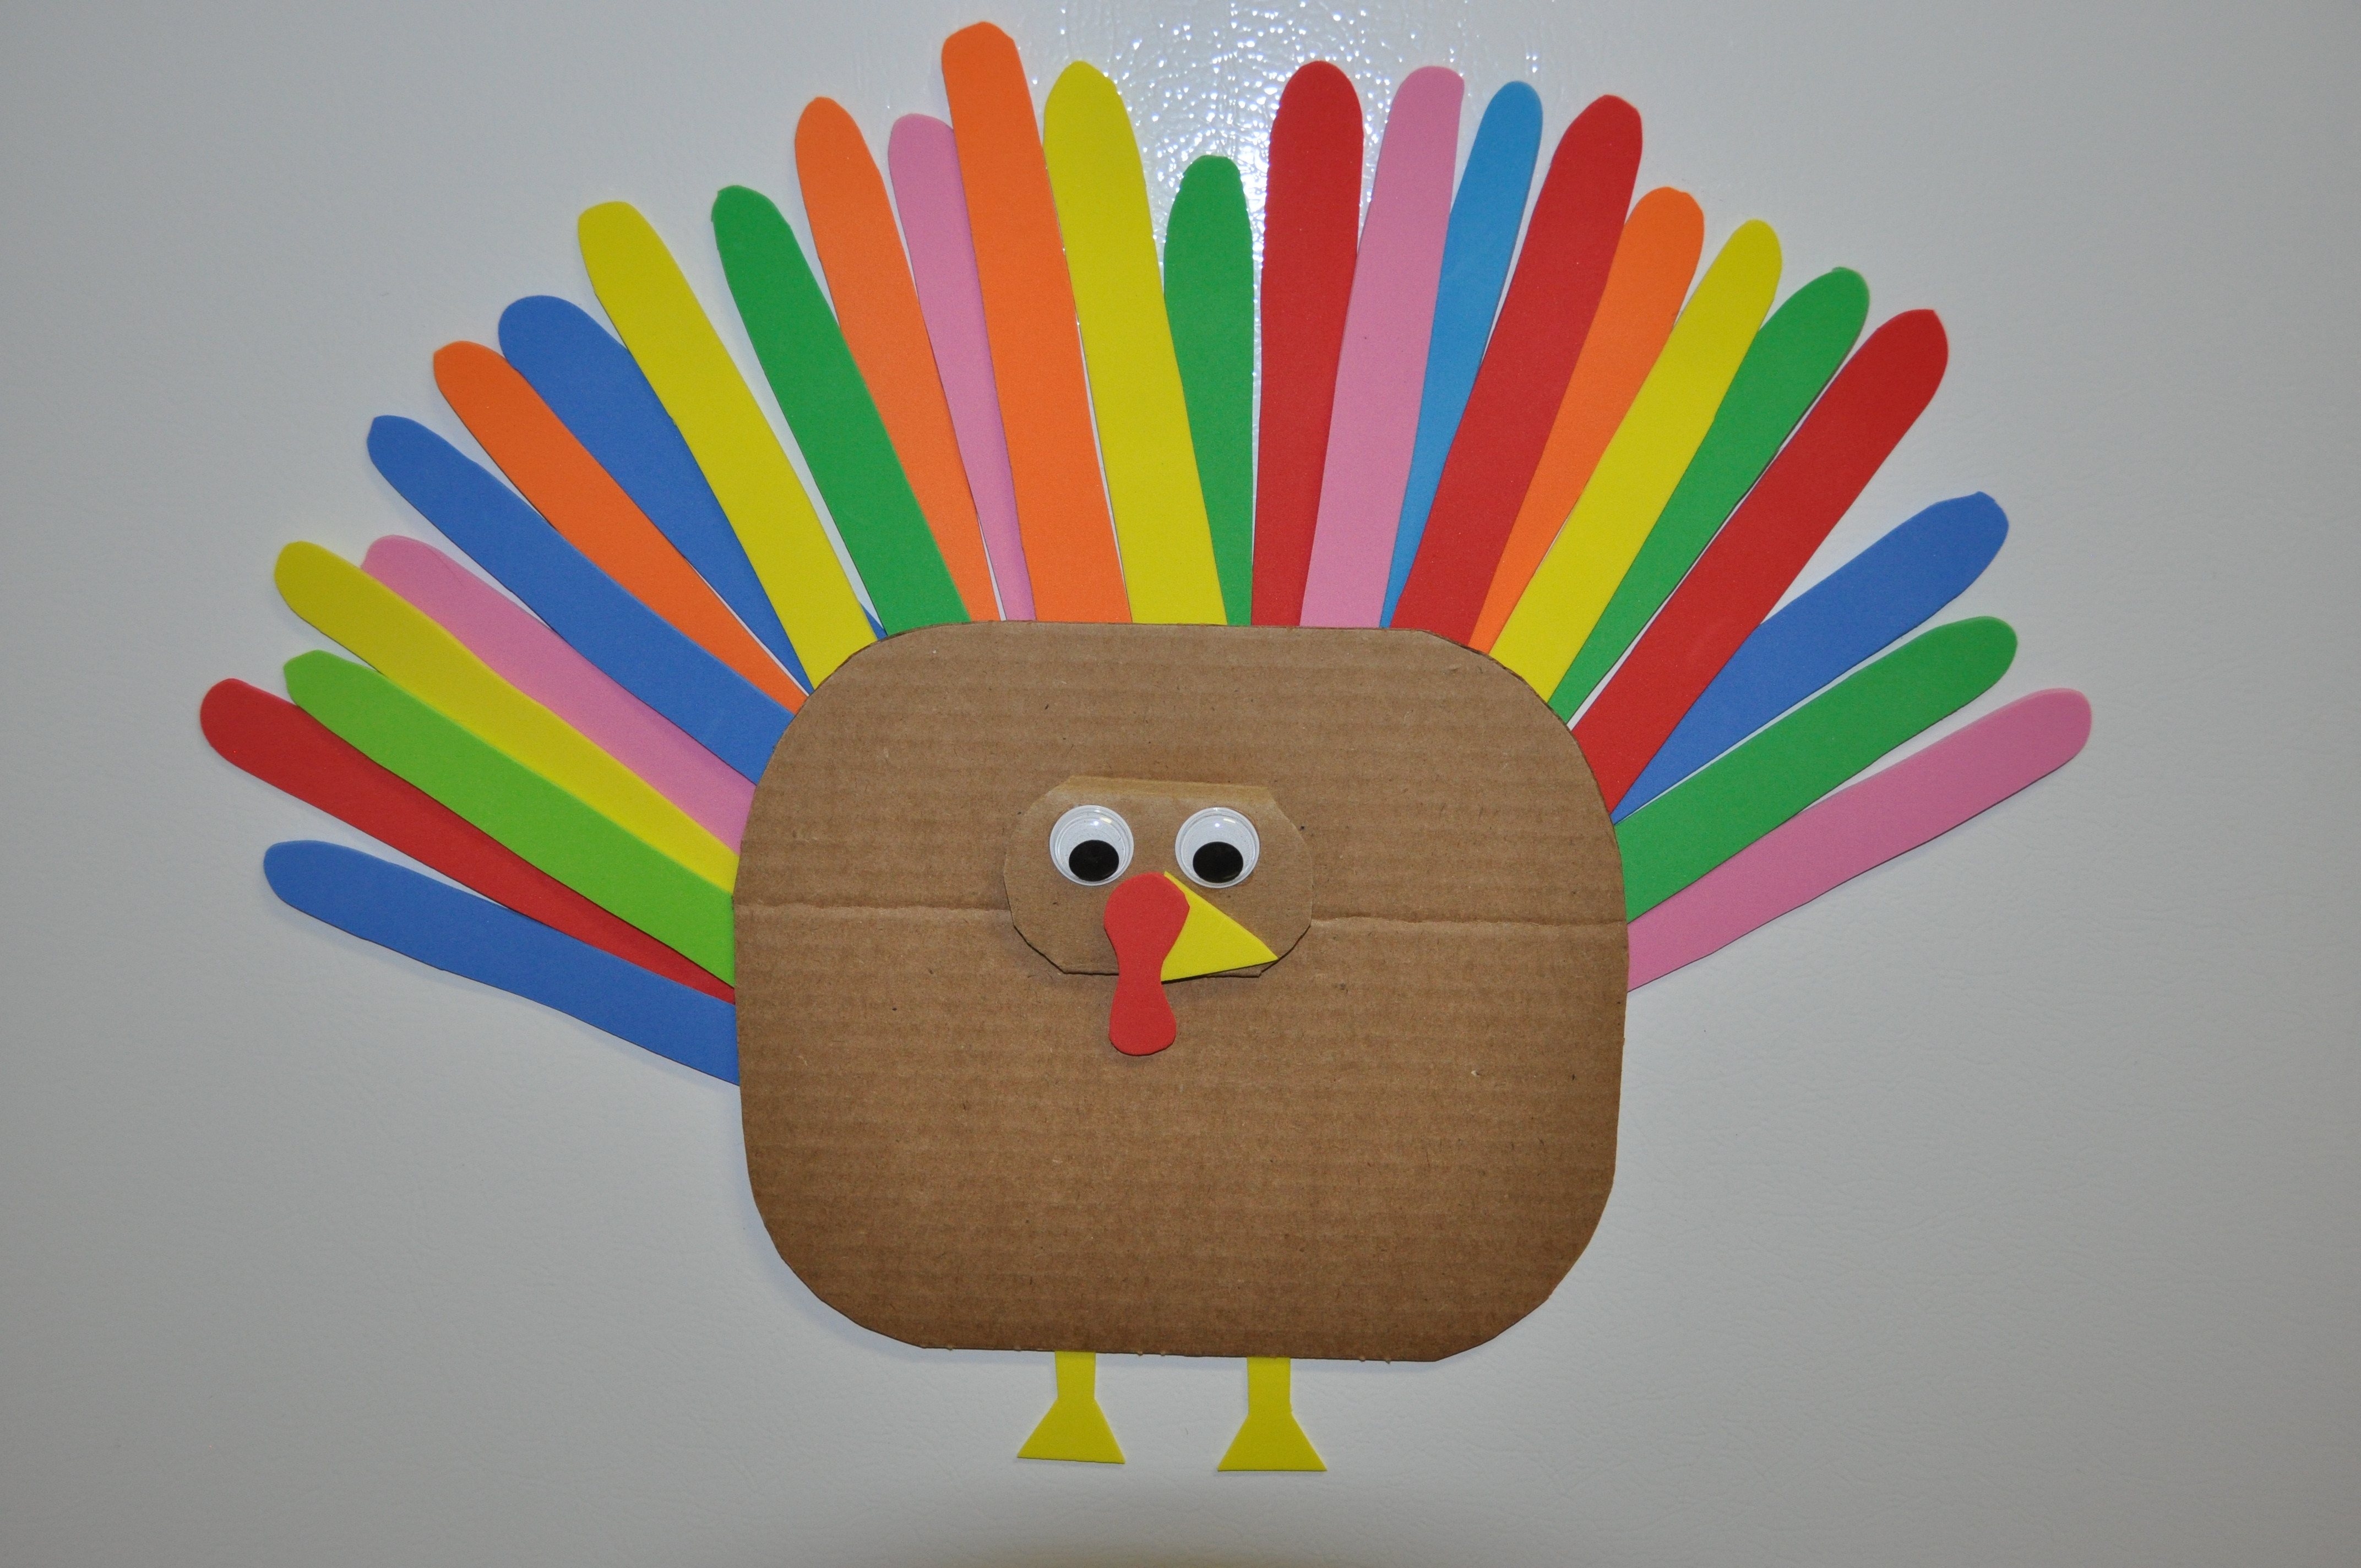 Thanksgiving Craft Ideas For Toddlers
 Pre Toddler 12 18 months